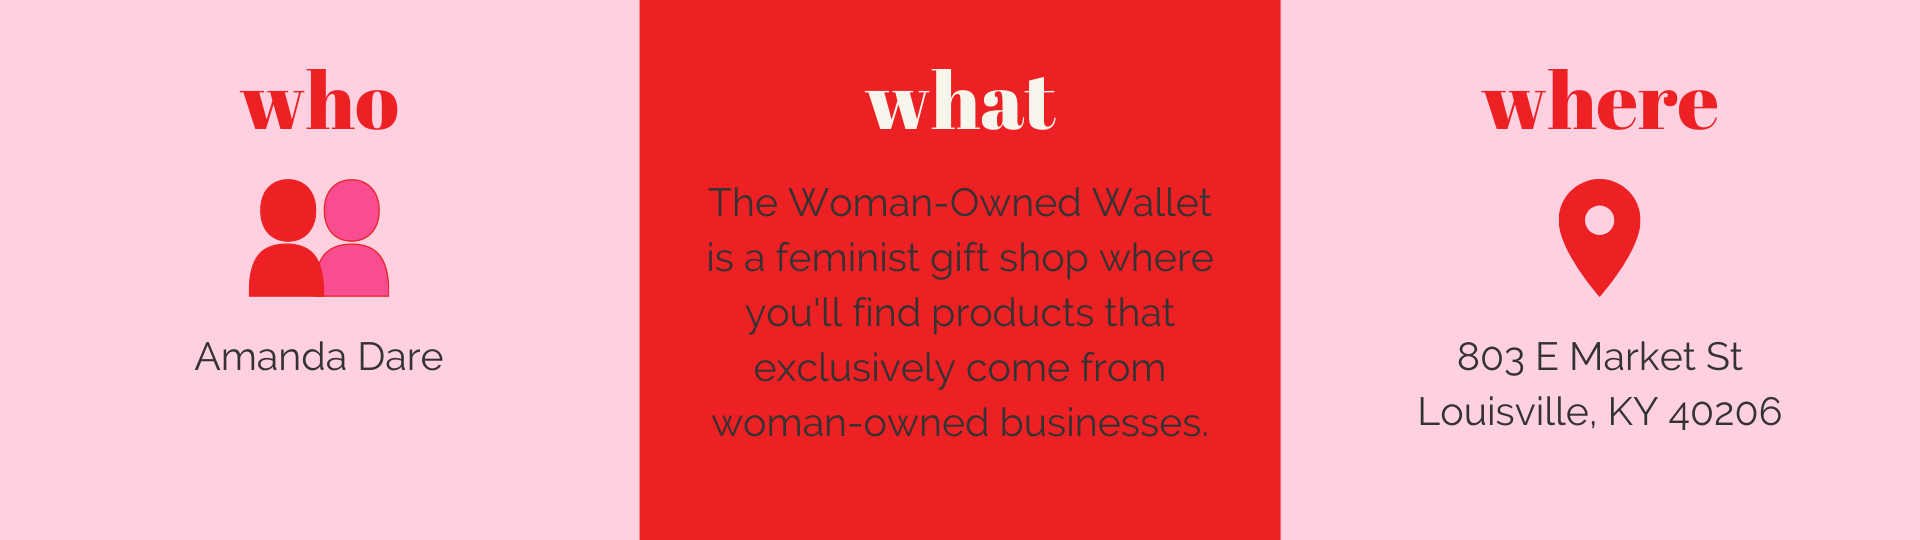 Woman-Owned Wallet, a woman-owned marketplace and the host of the woman-owned walking tour